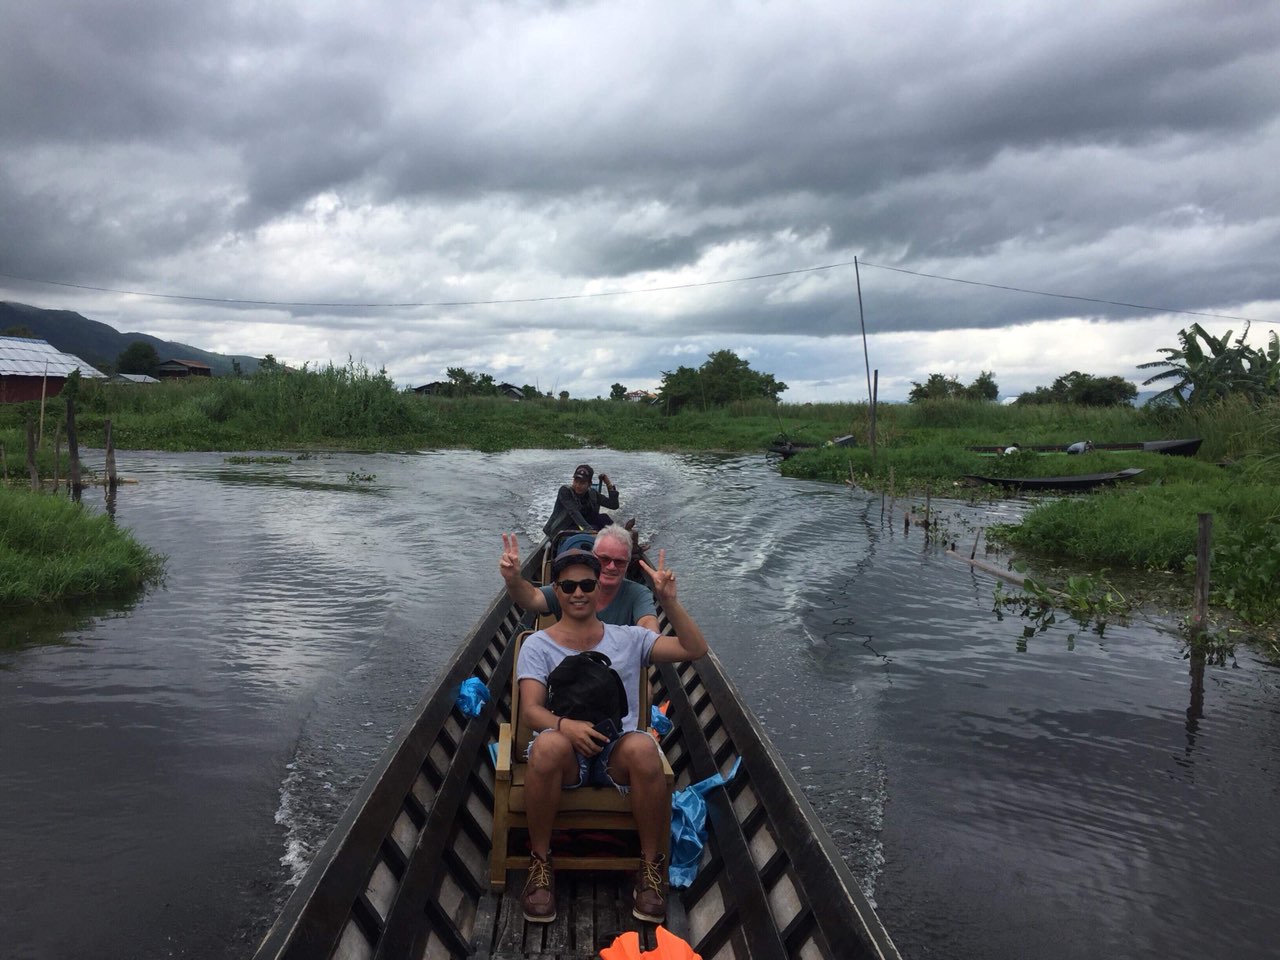 Inle boat